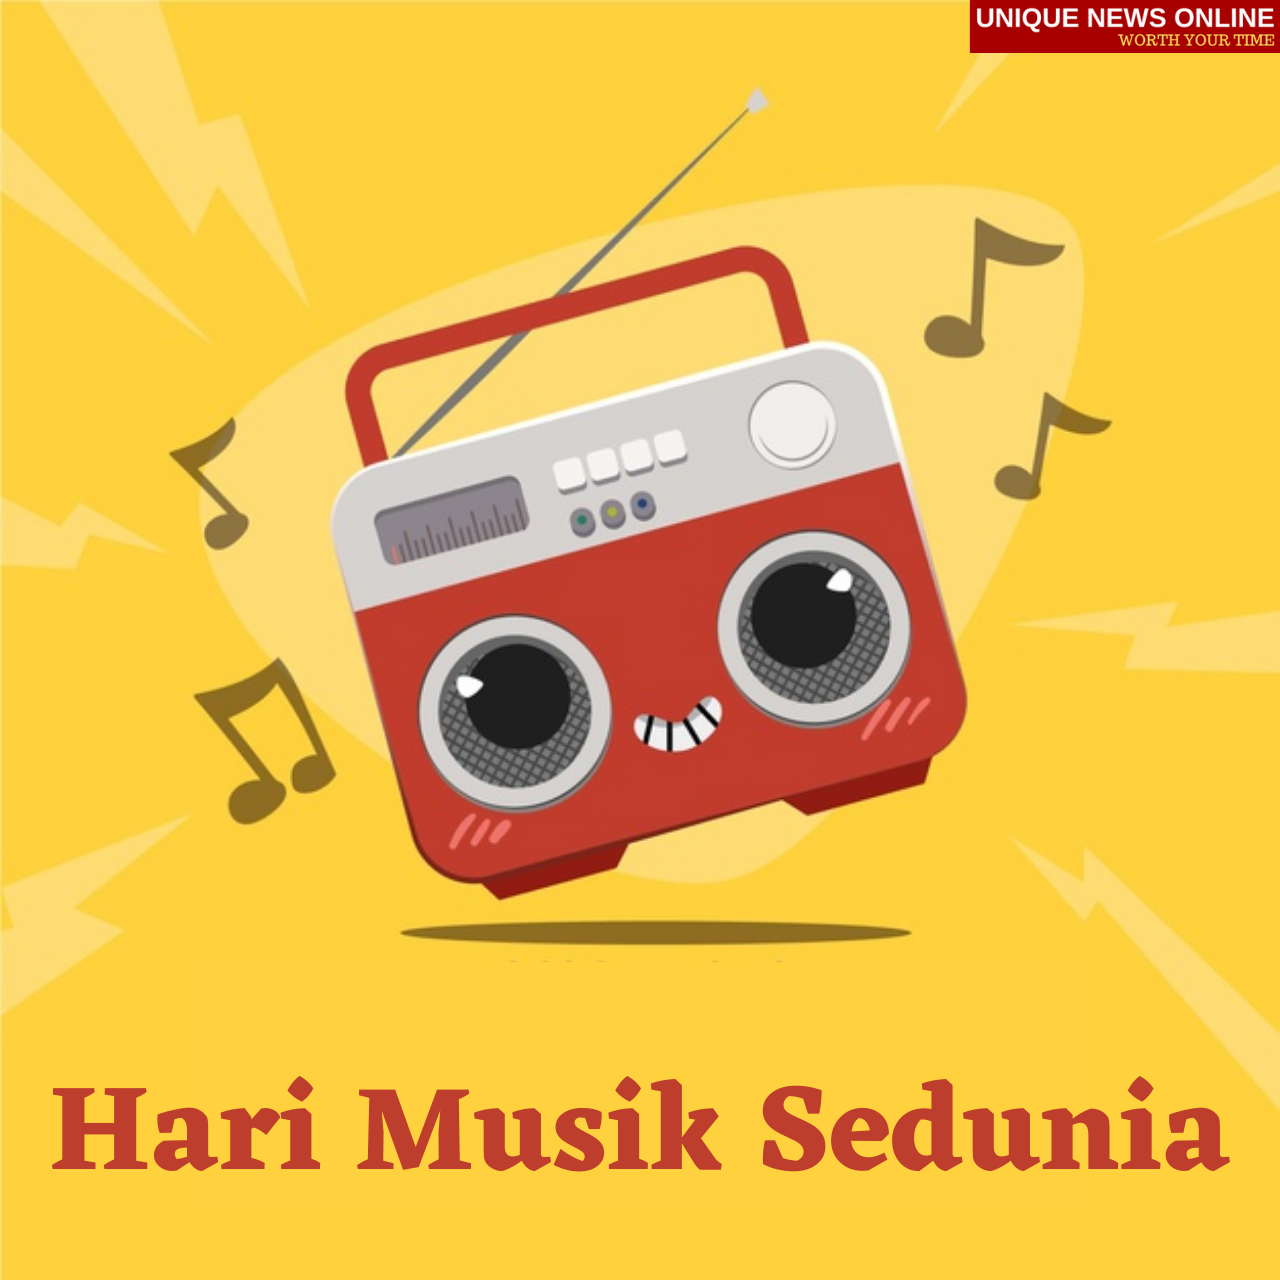 Hari Musik Sedunia 2021 Indonesian Wishes, Images, Quotes, Greetings, and Messages to Share